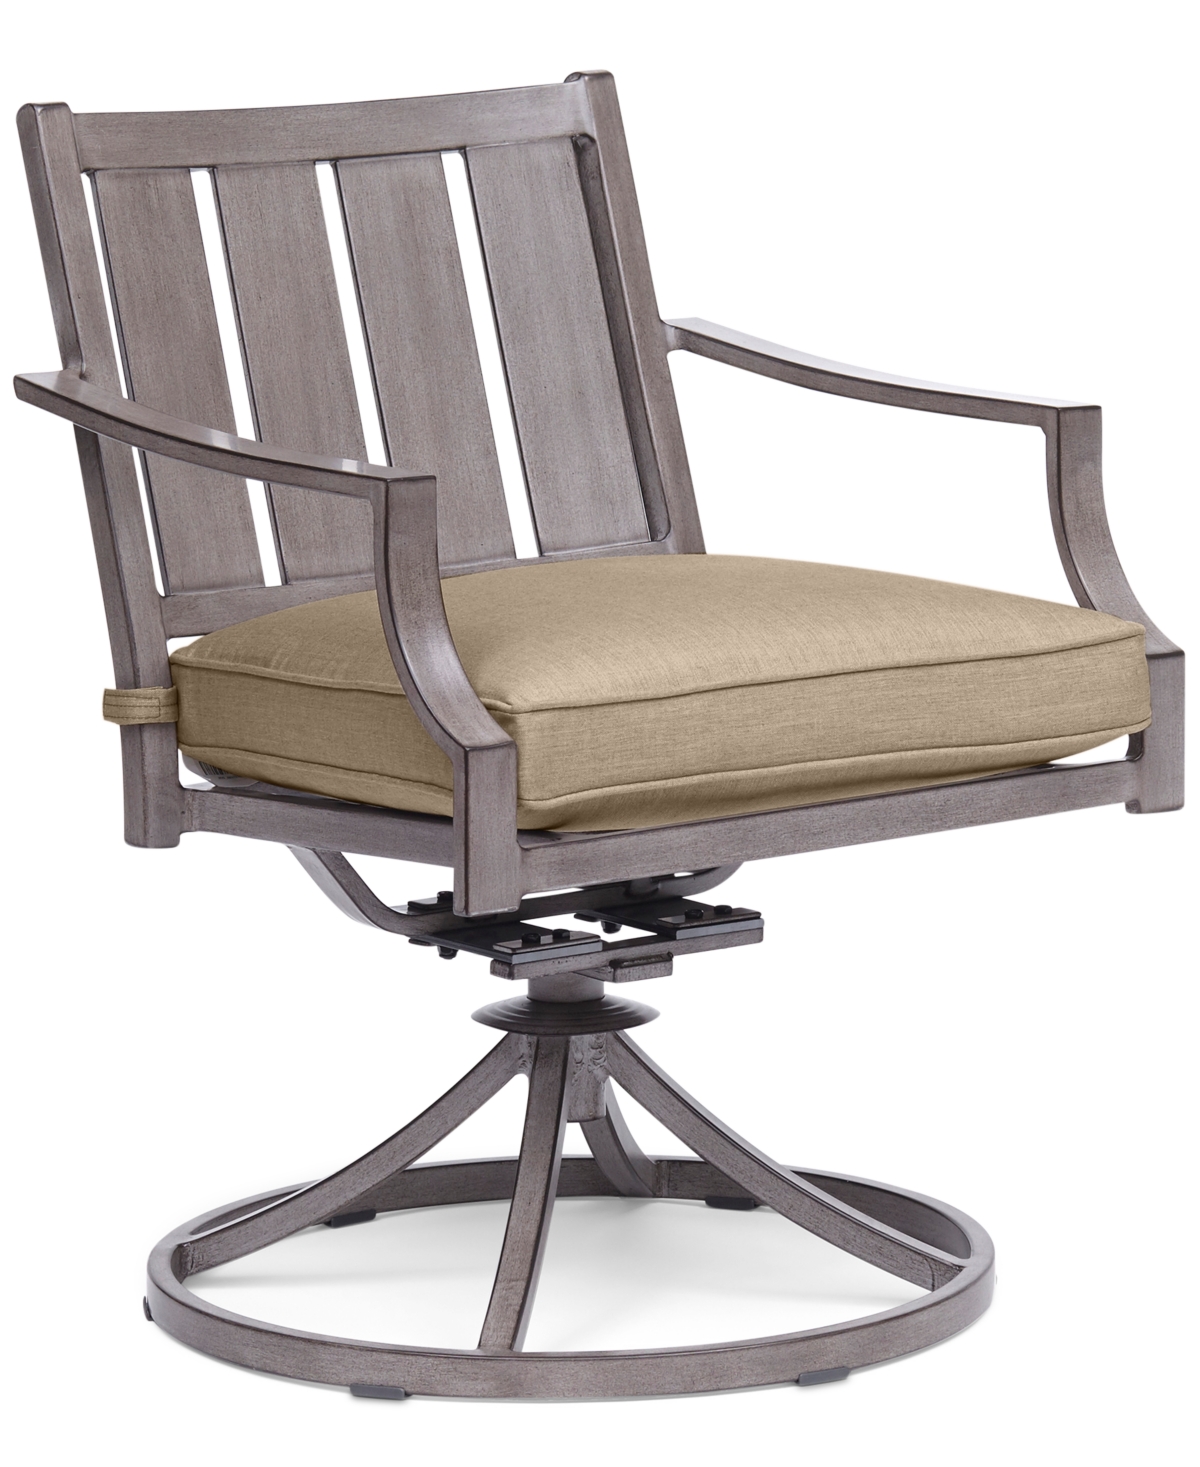 Agio Wayland Outdoor Swivel Chair, Created For Macy's In Outdura Remy Pebble